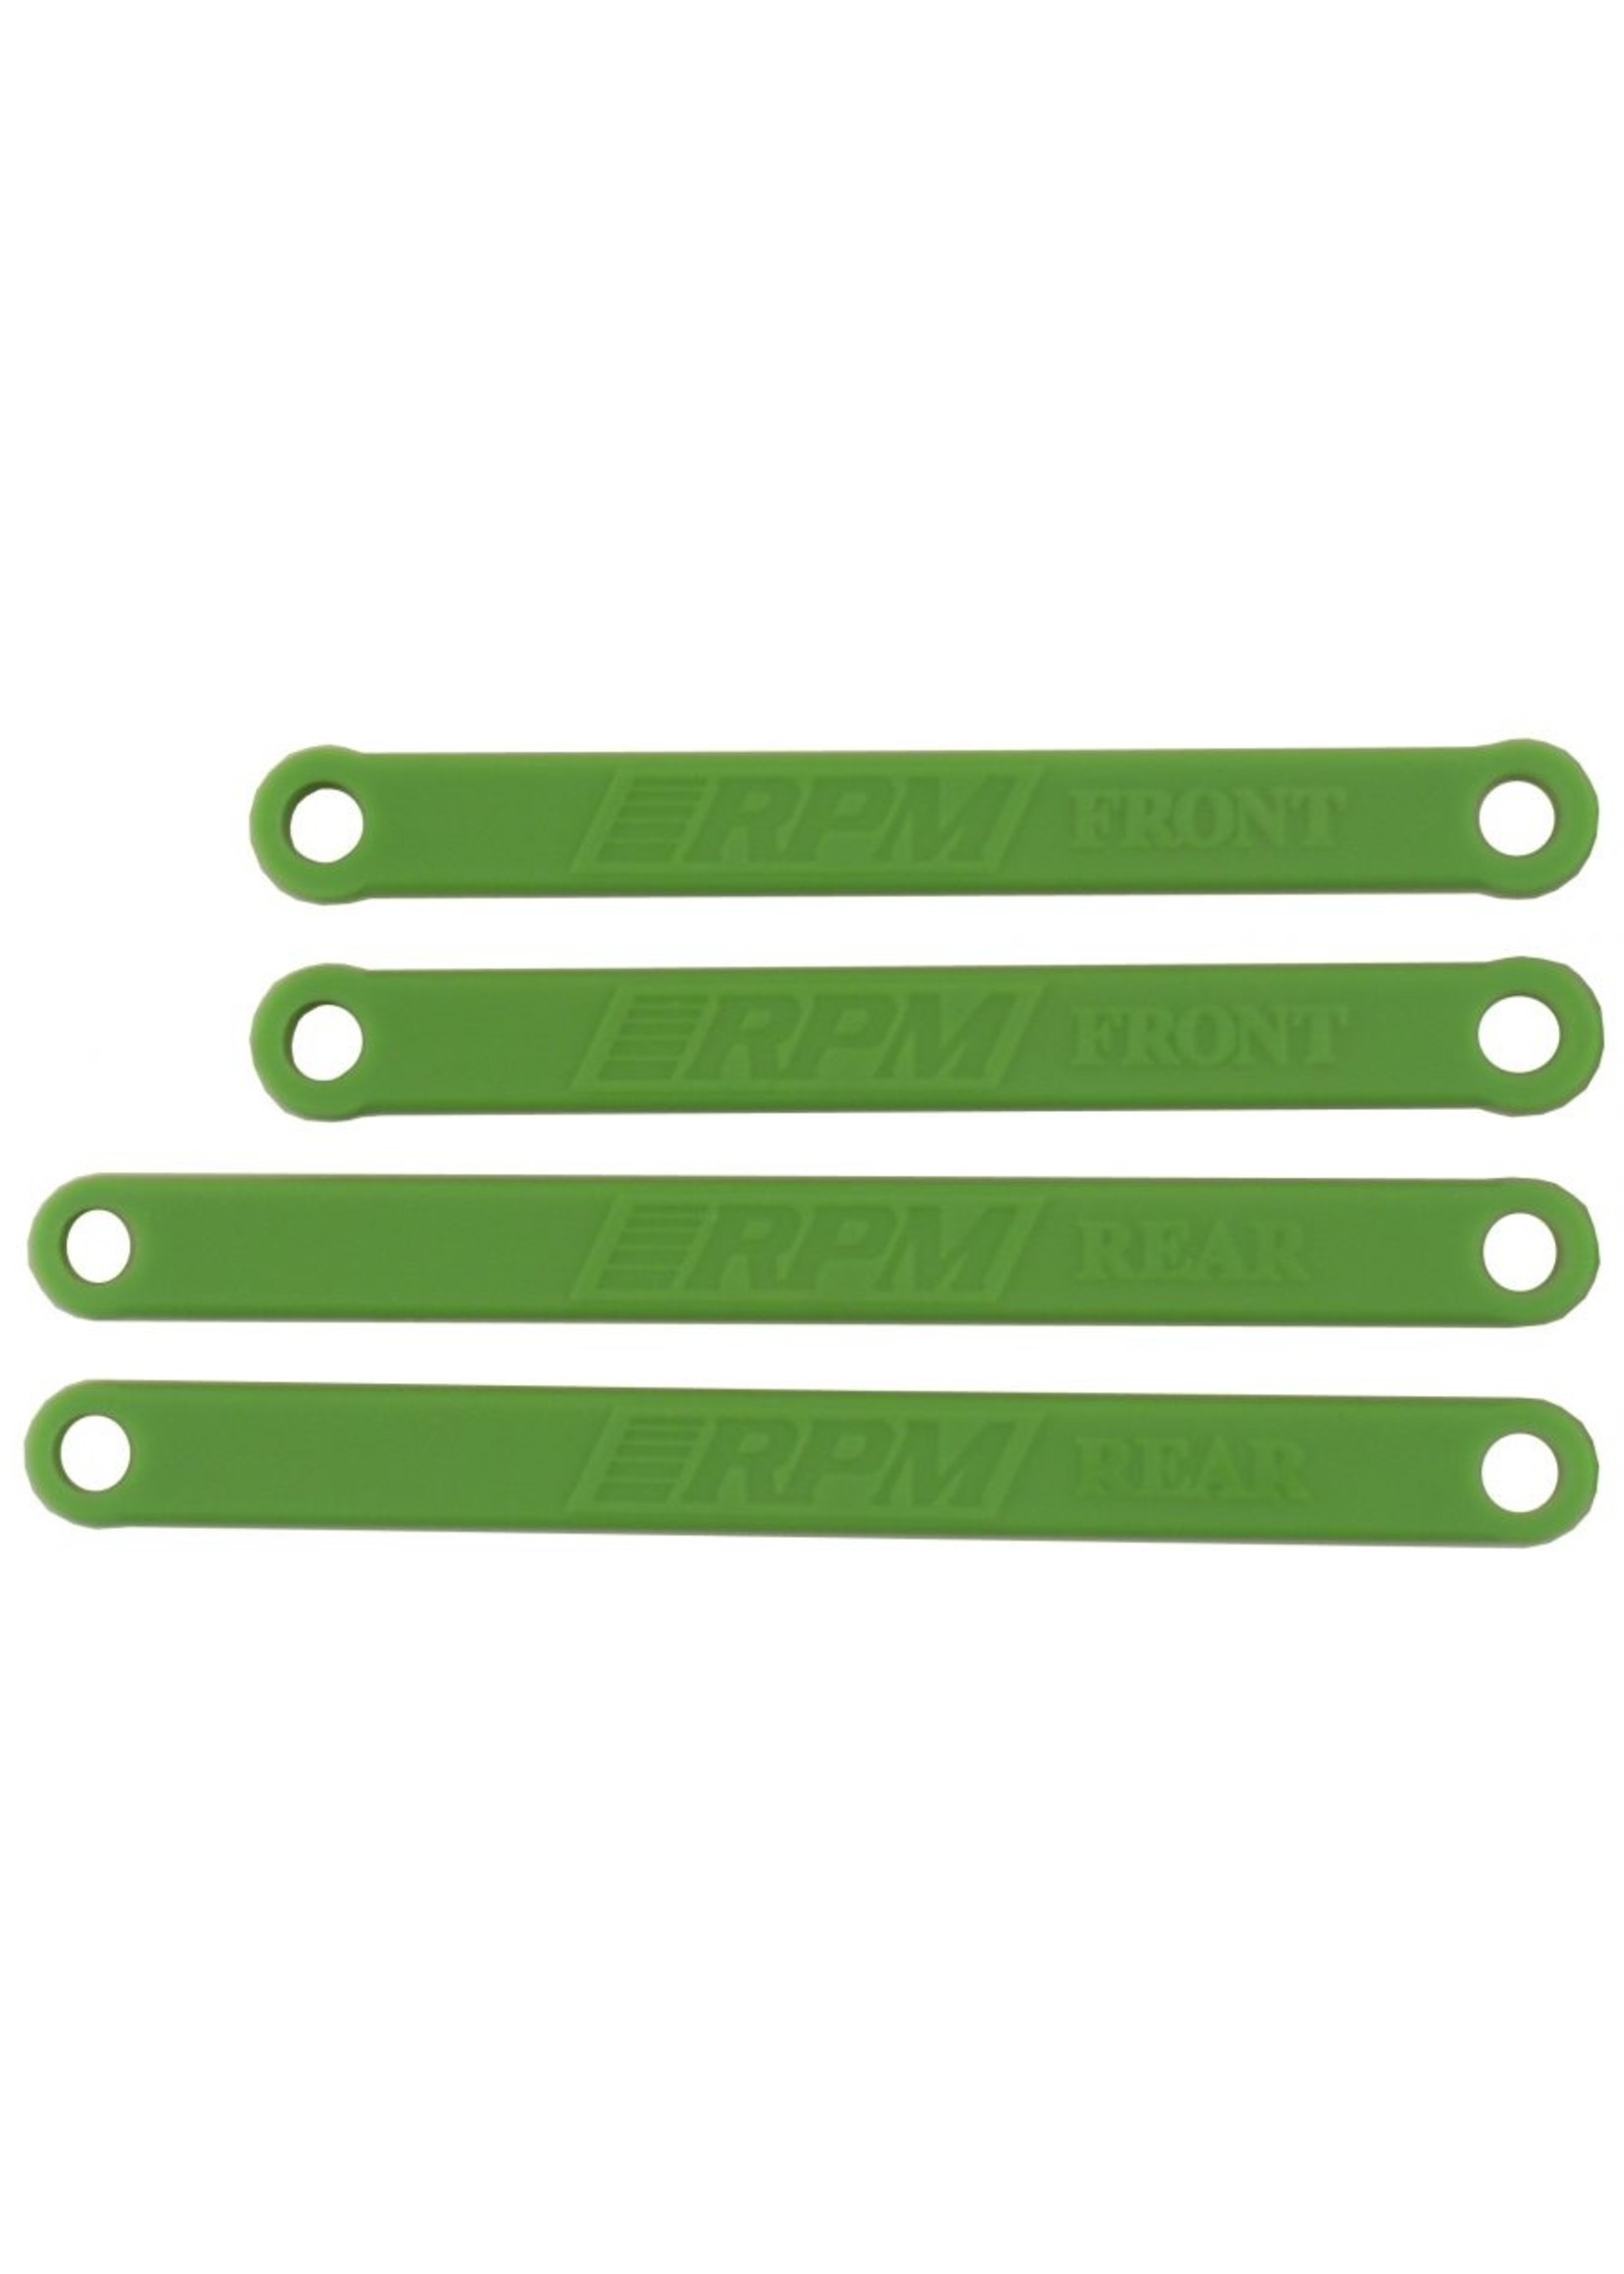 RPM 81264 - Heavy Duty Camber Links for Traxxas Rustler, Stampede 2WD - Green